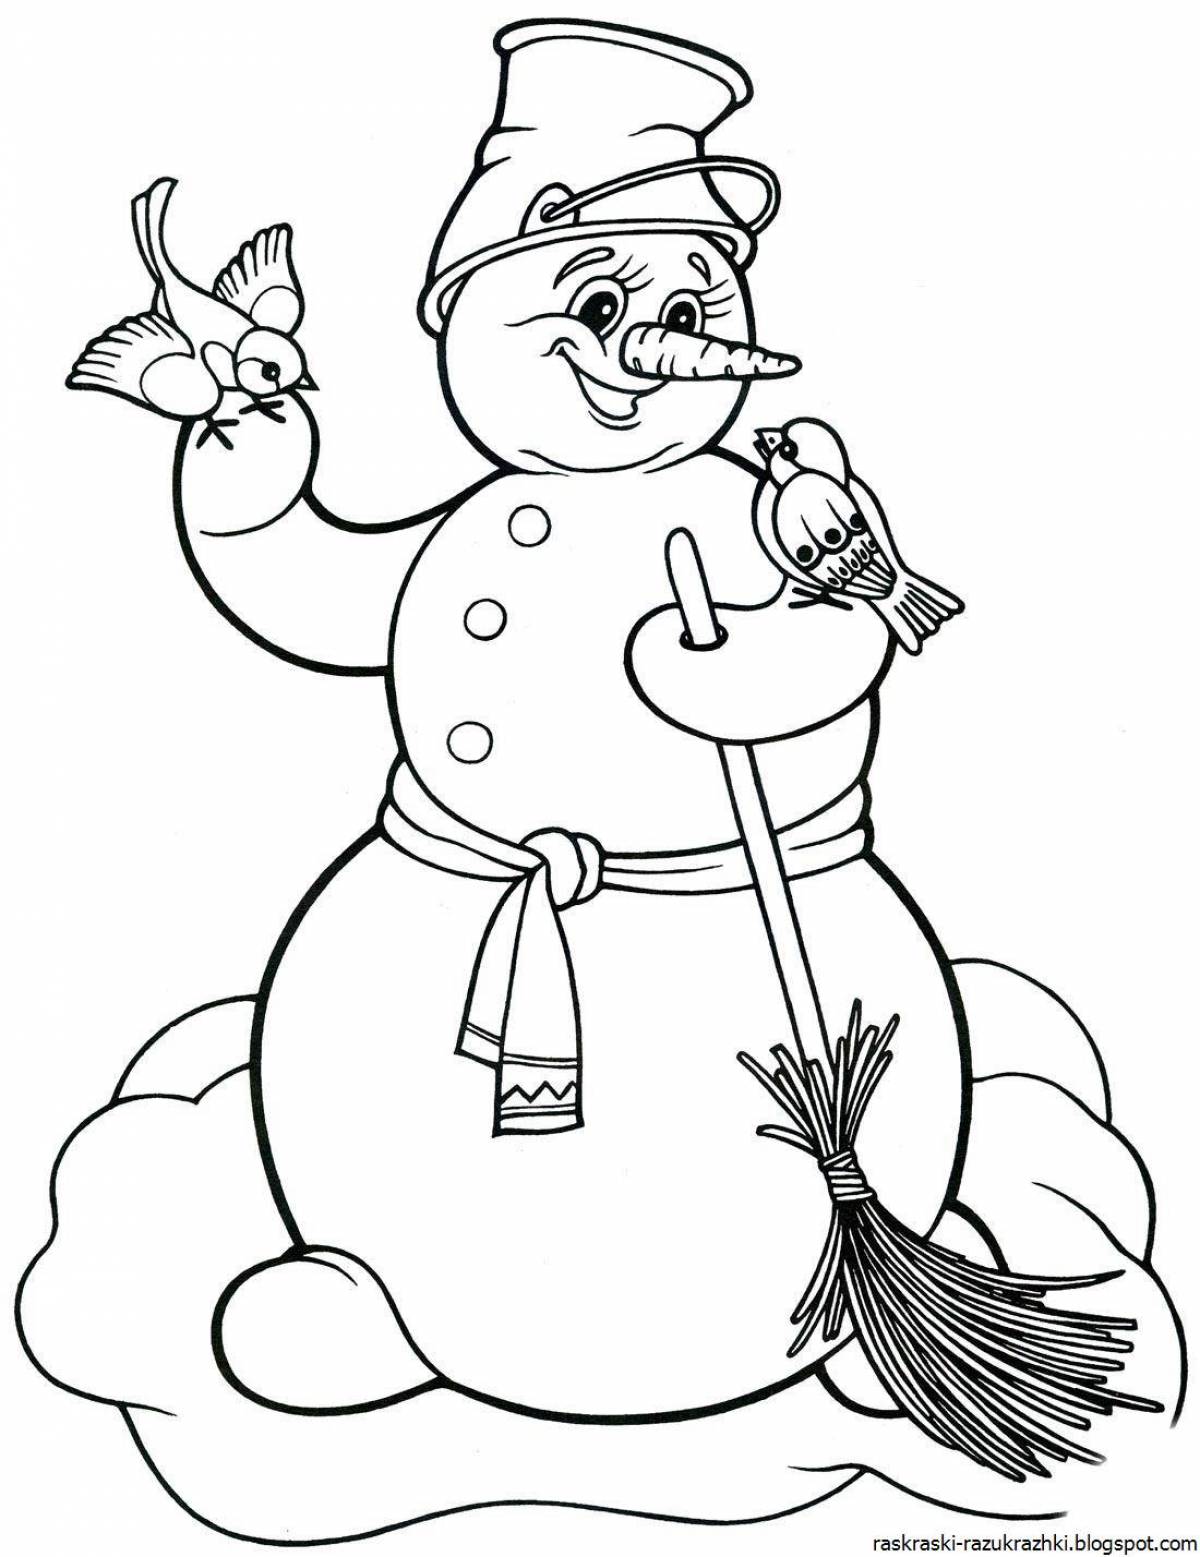 Aqala playful coloring page